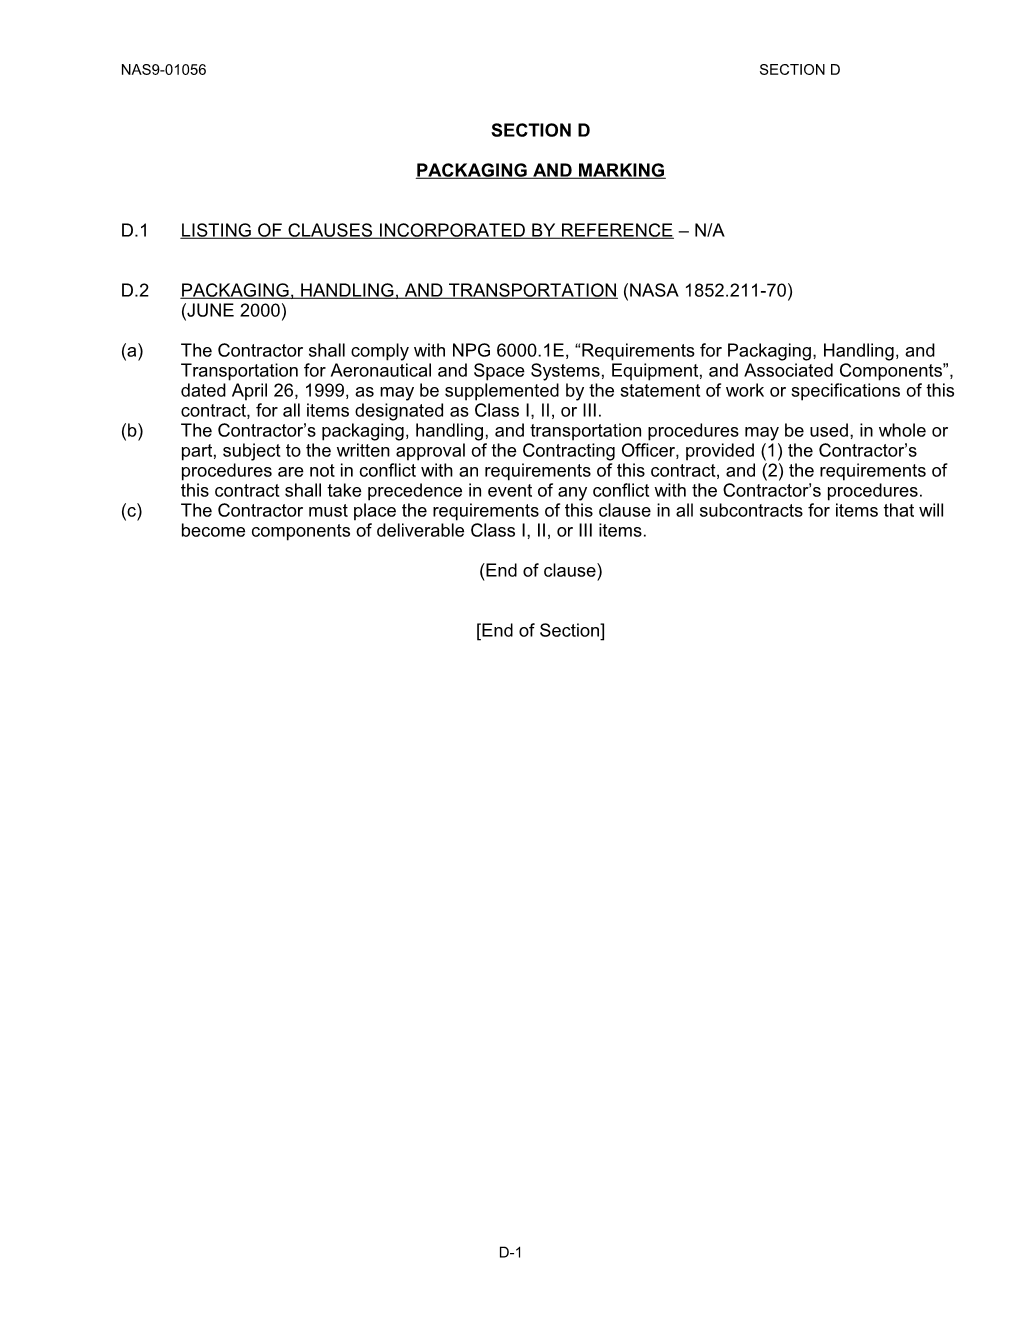 D.1 Listing of Clauses Incorporated by Reference N/A